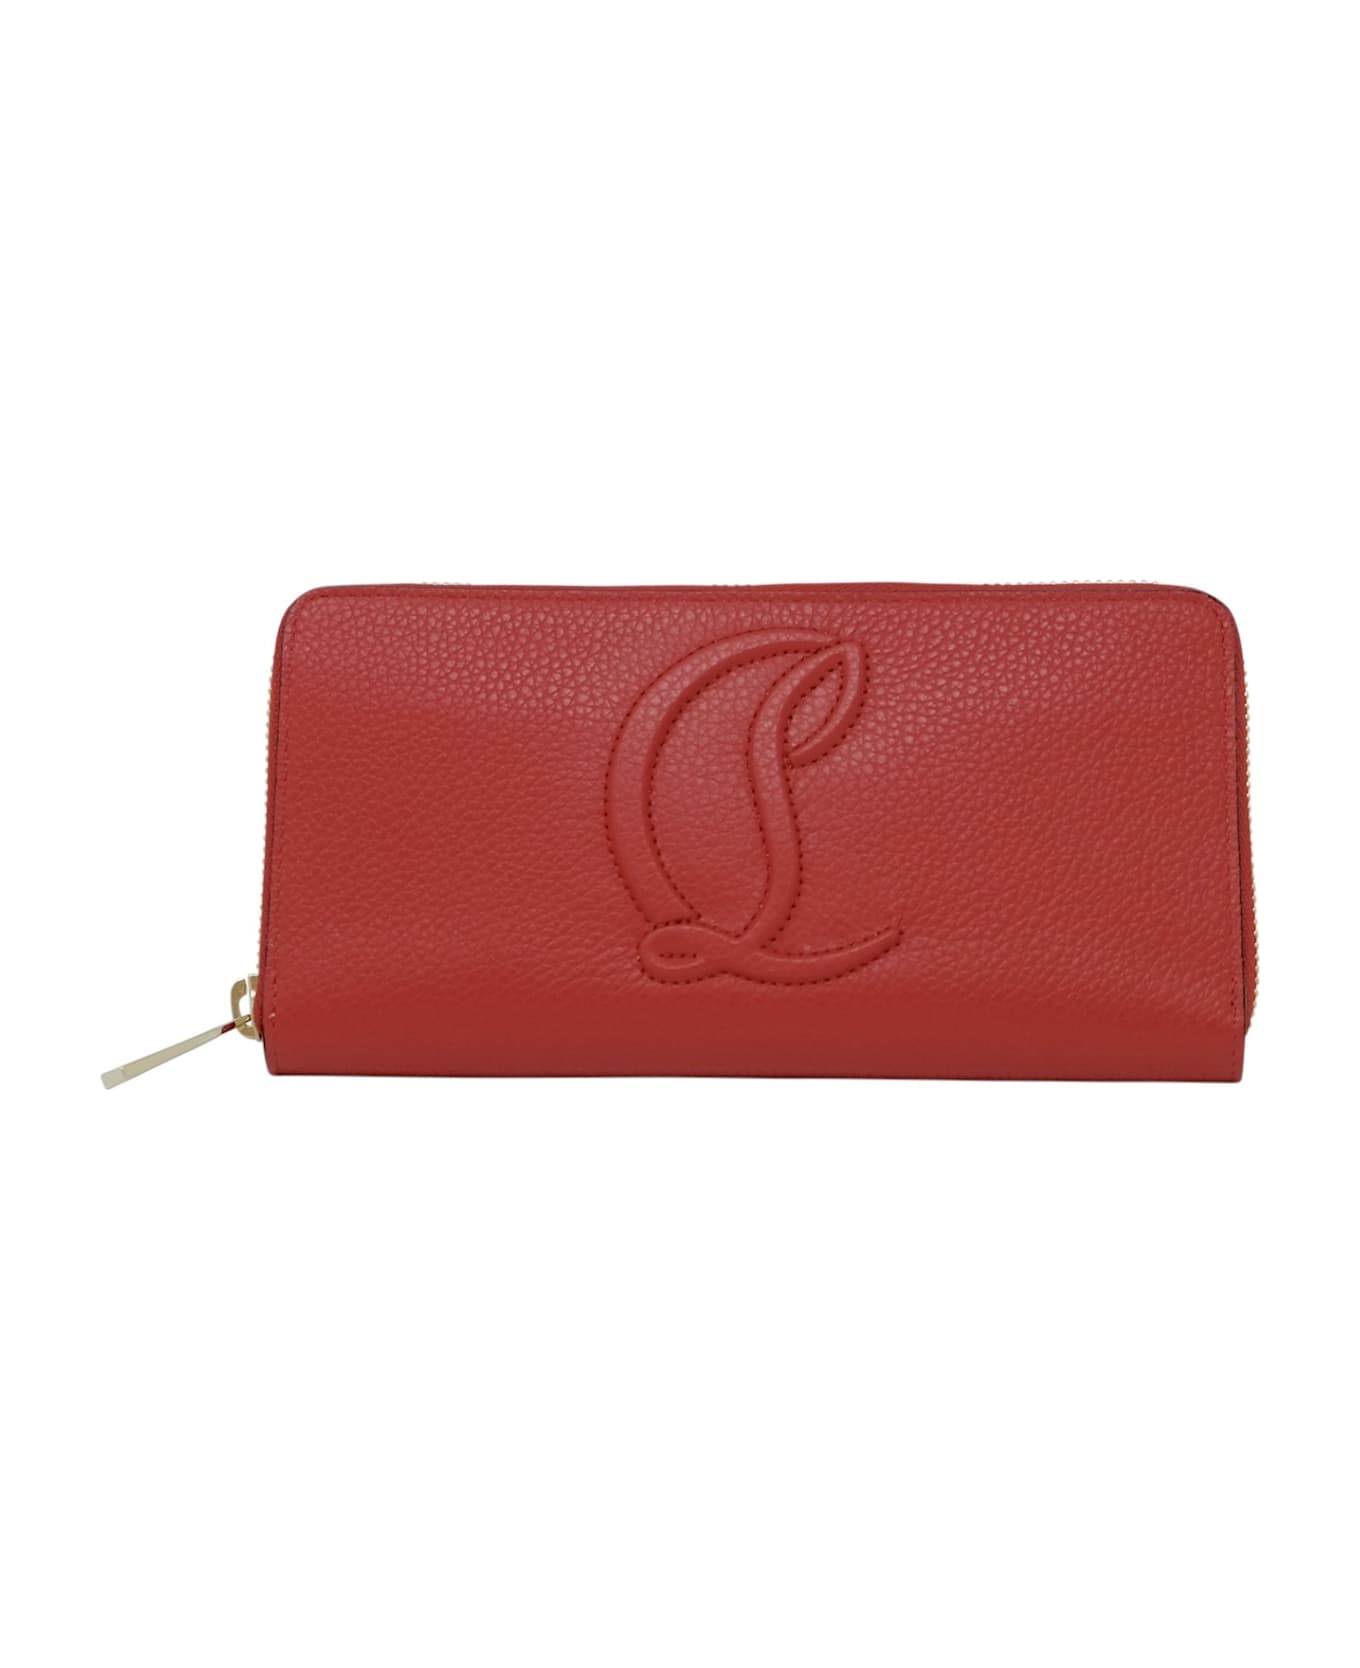 Christian Louboutin By My Side Red Calf Leather Wallet - RED